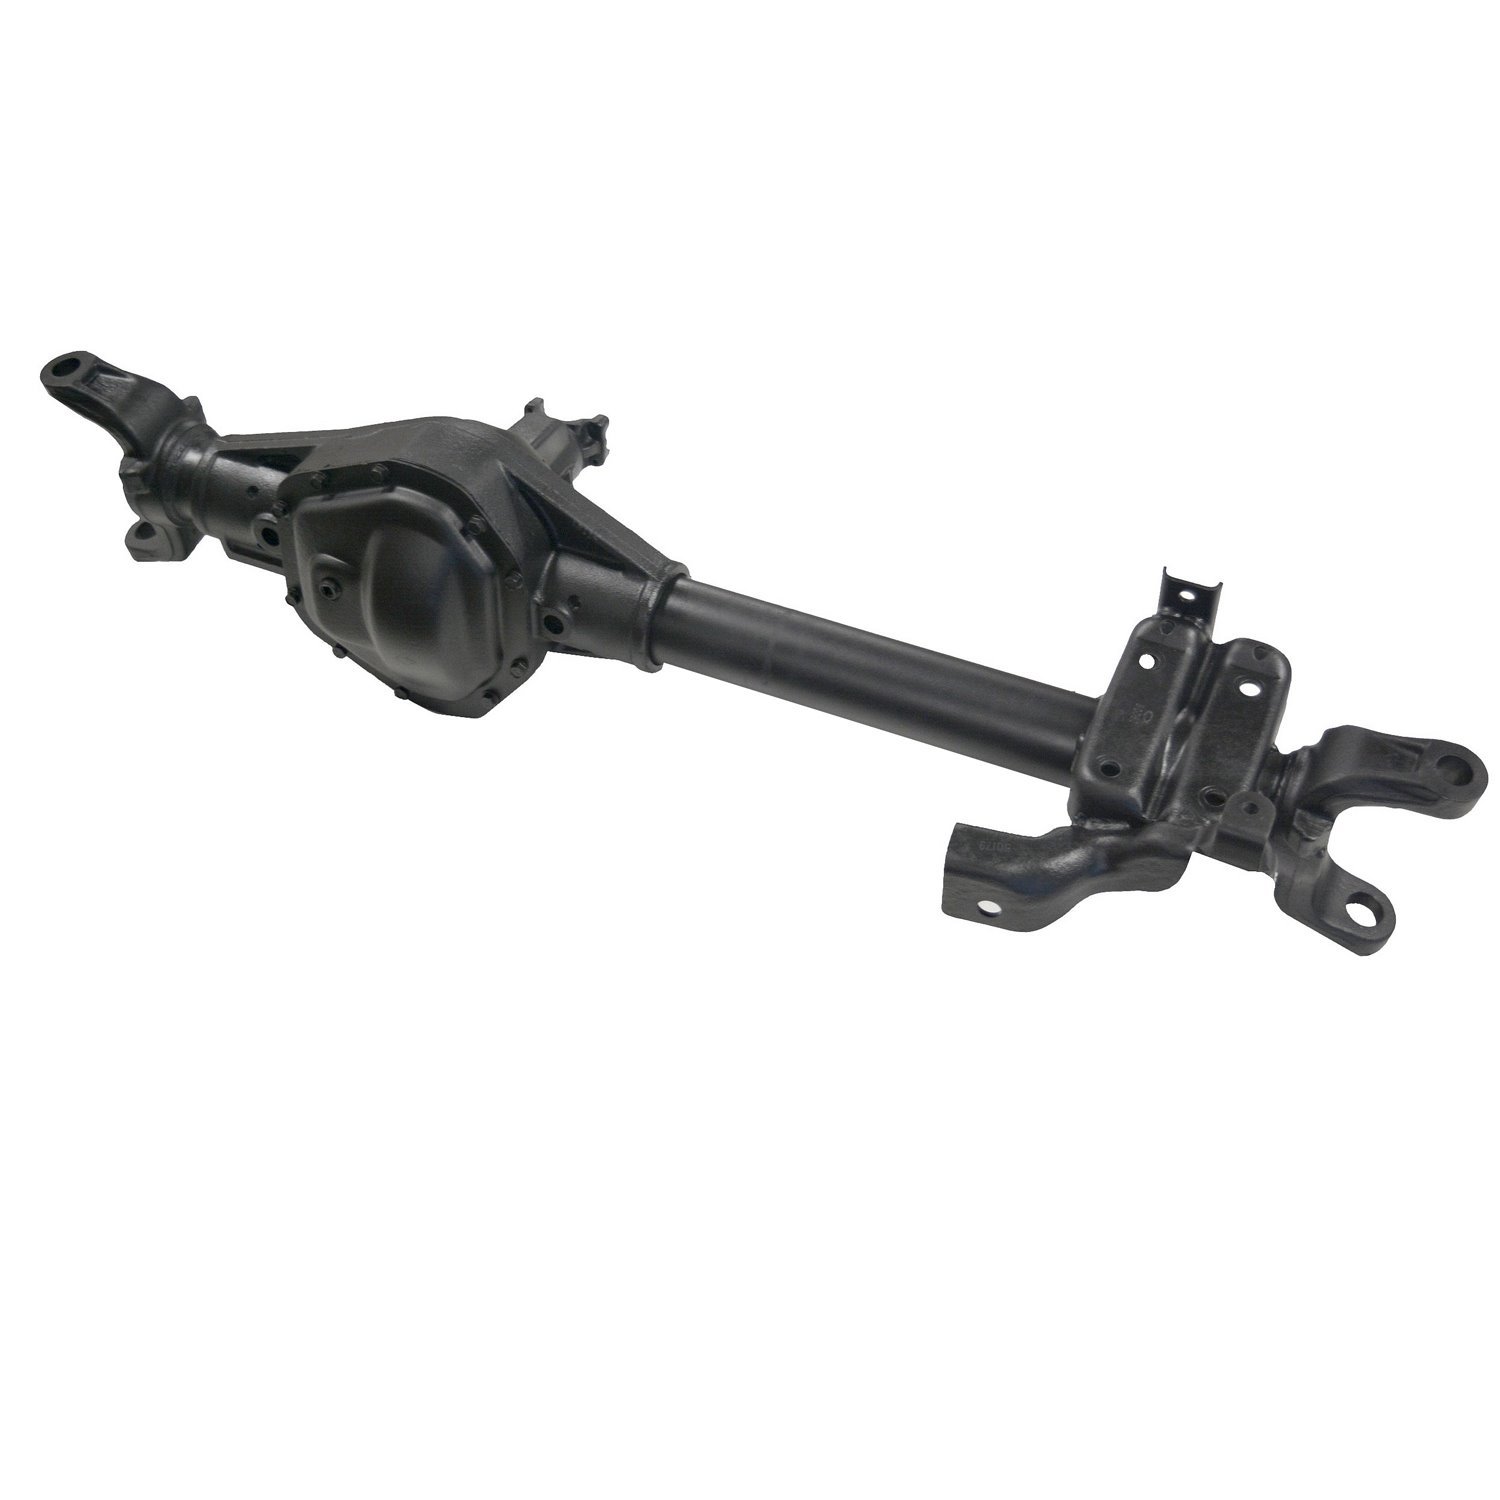 Remanufactured Complete Axle Assy for Dana 50 1999 F250 & F350, 4.10 , SRW, 4 Wheel ABS